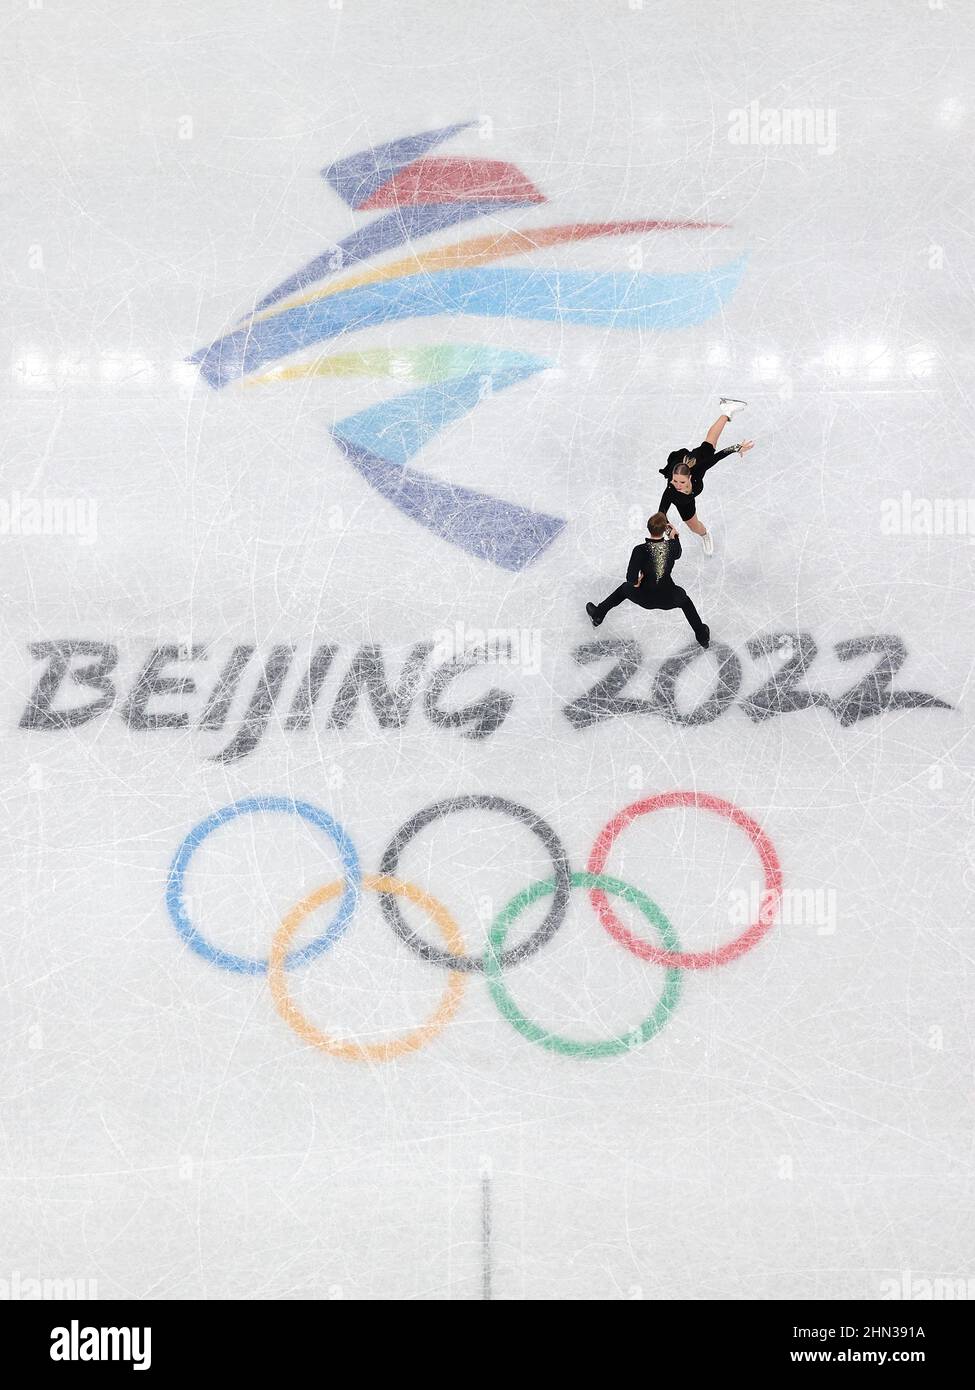 Beijing, China. 14th Feb, 2022. Natalie Taschlerova (top) and Filip Taschler of Czech Republic perform during the figure skating ice dance free dance match of Beijing 2022 Winter Olympics at Capital Indoor Stadium in Beijing, capital of China, Feb. 14, 2022. Credit: Xu Zijian/Xinhua/Alamy Live News Stock Photo